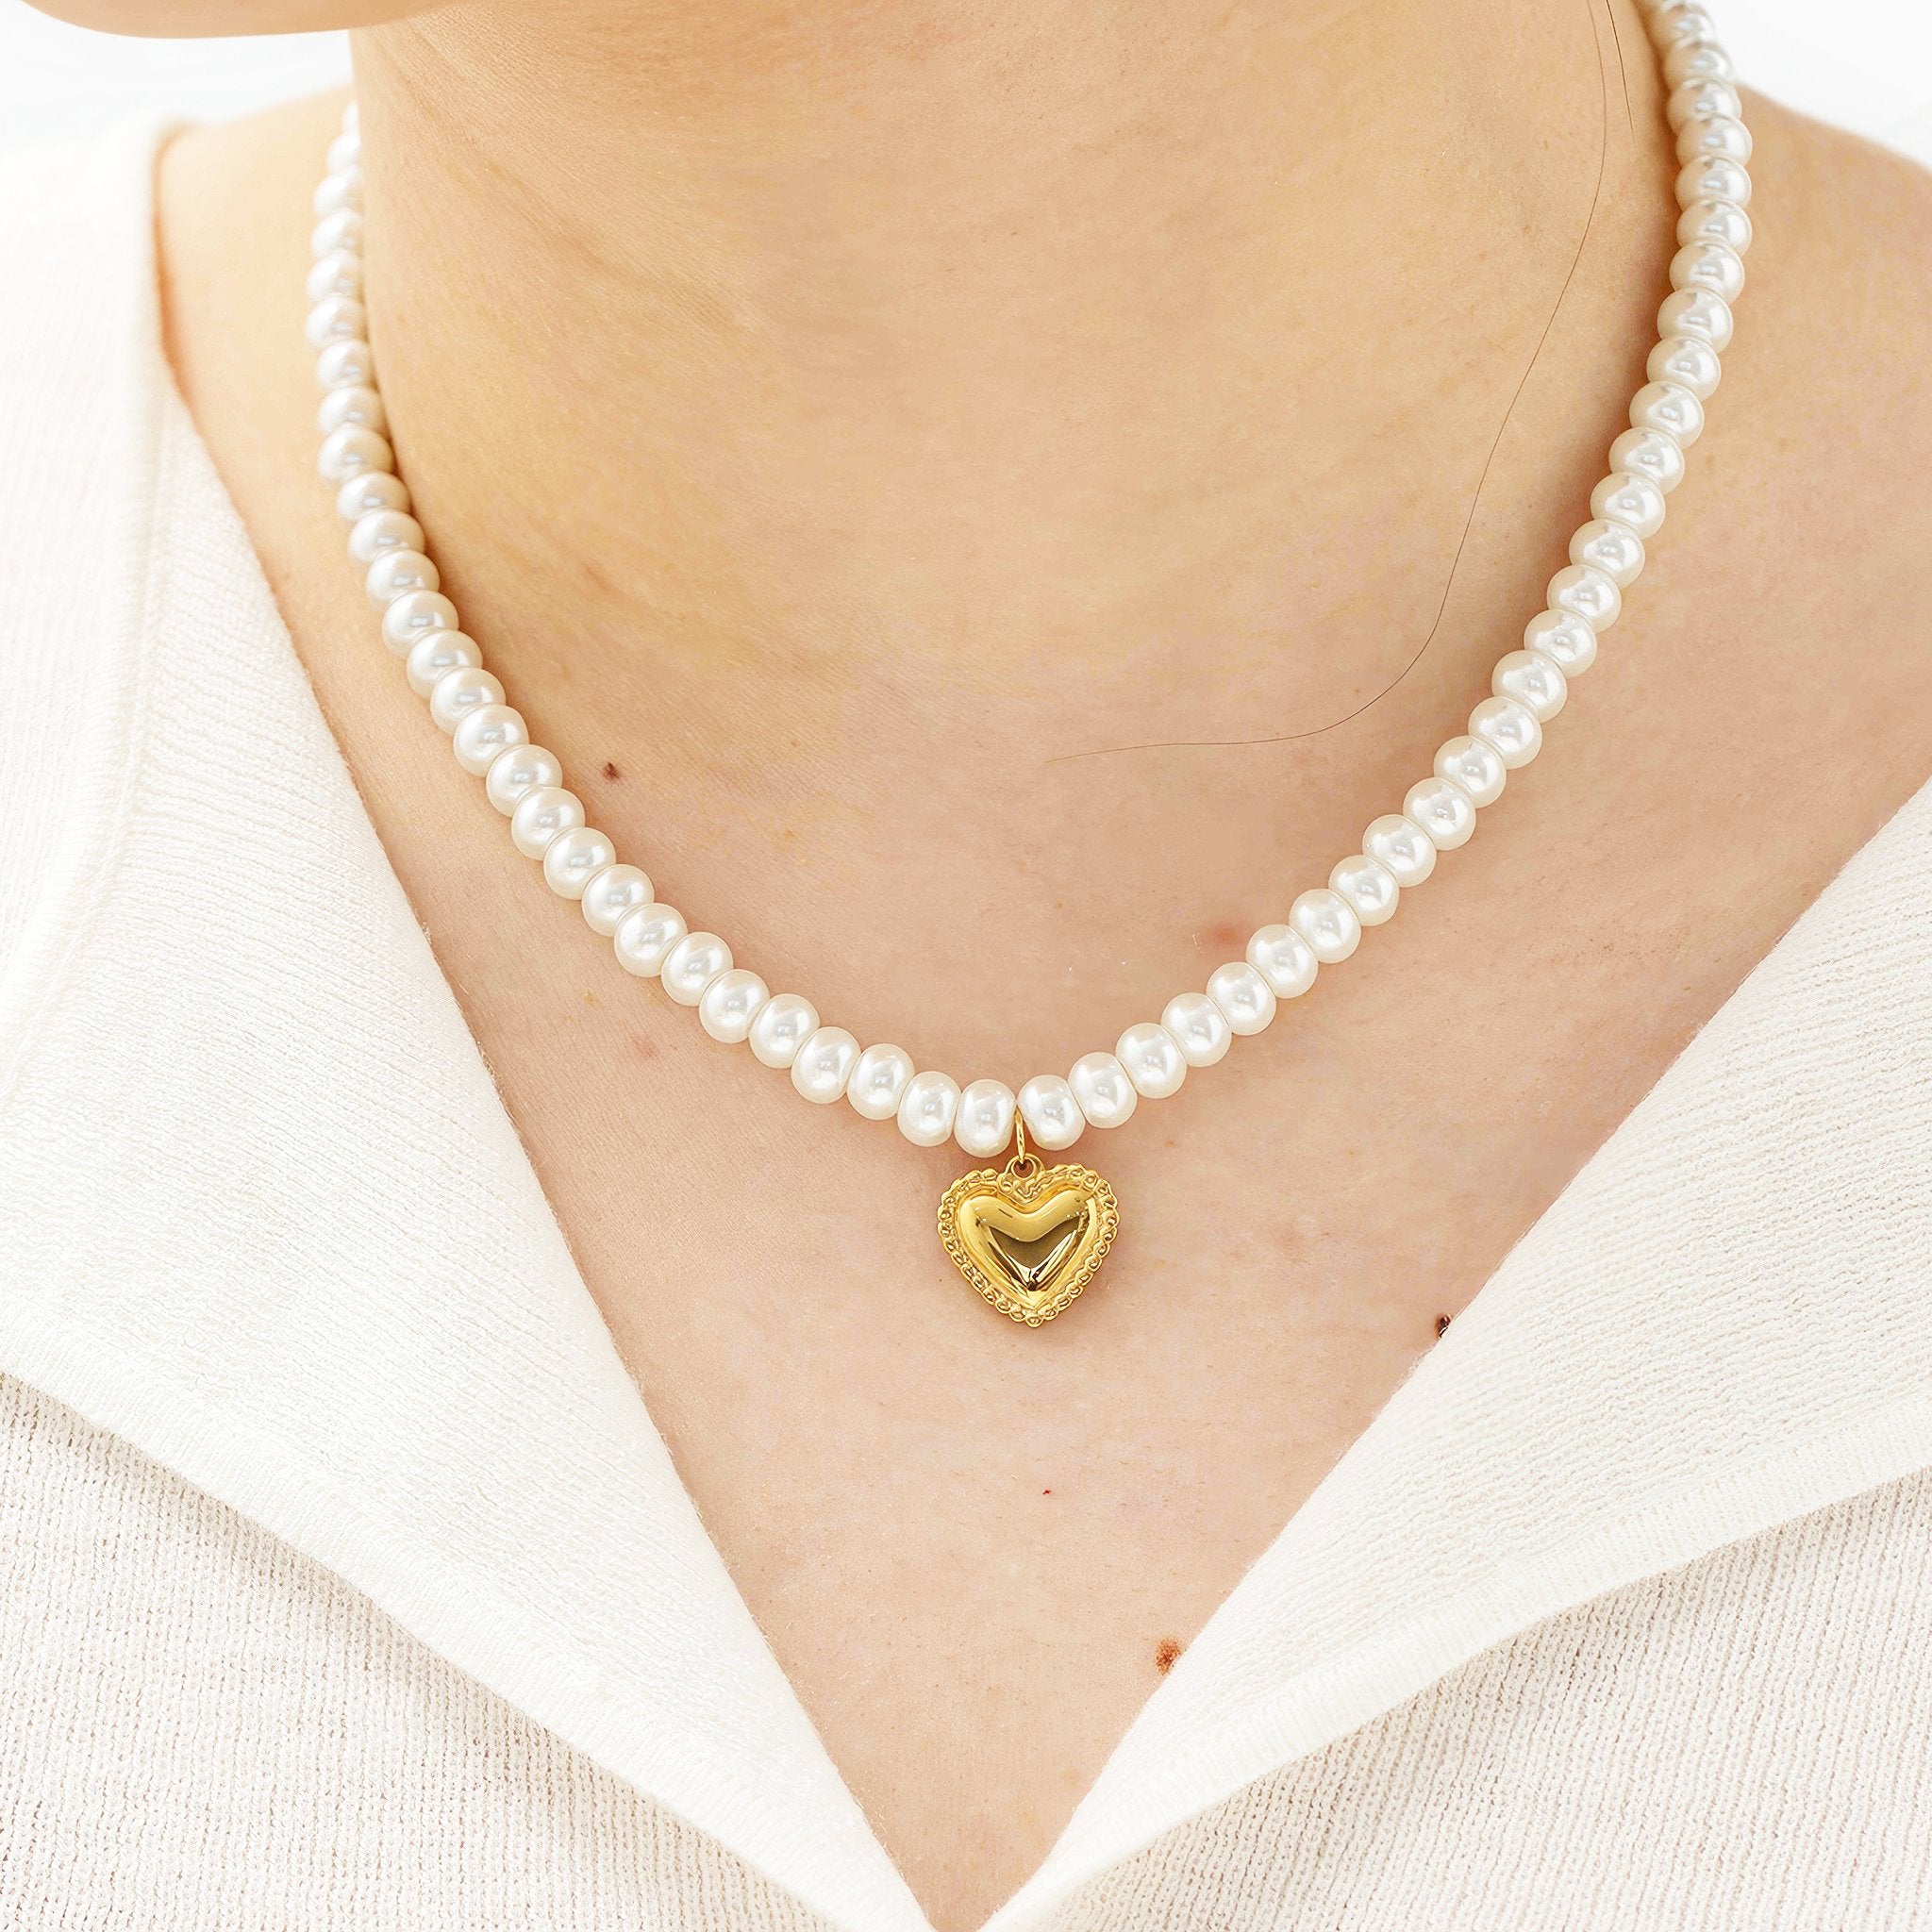 Pearl and Heart Pendant Necklace - Nobbier - Necklace - 18K Gold And Titanium PVD Coated Jewelry